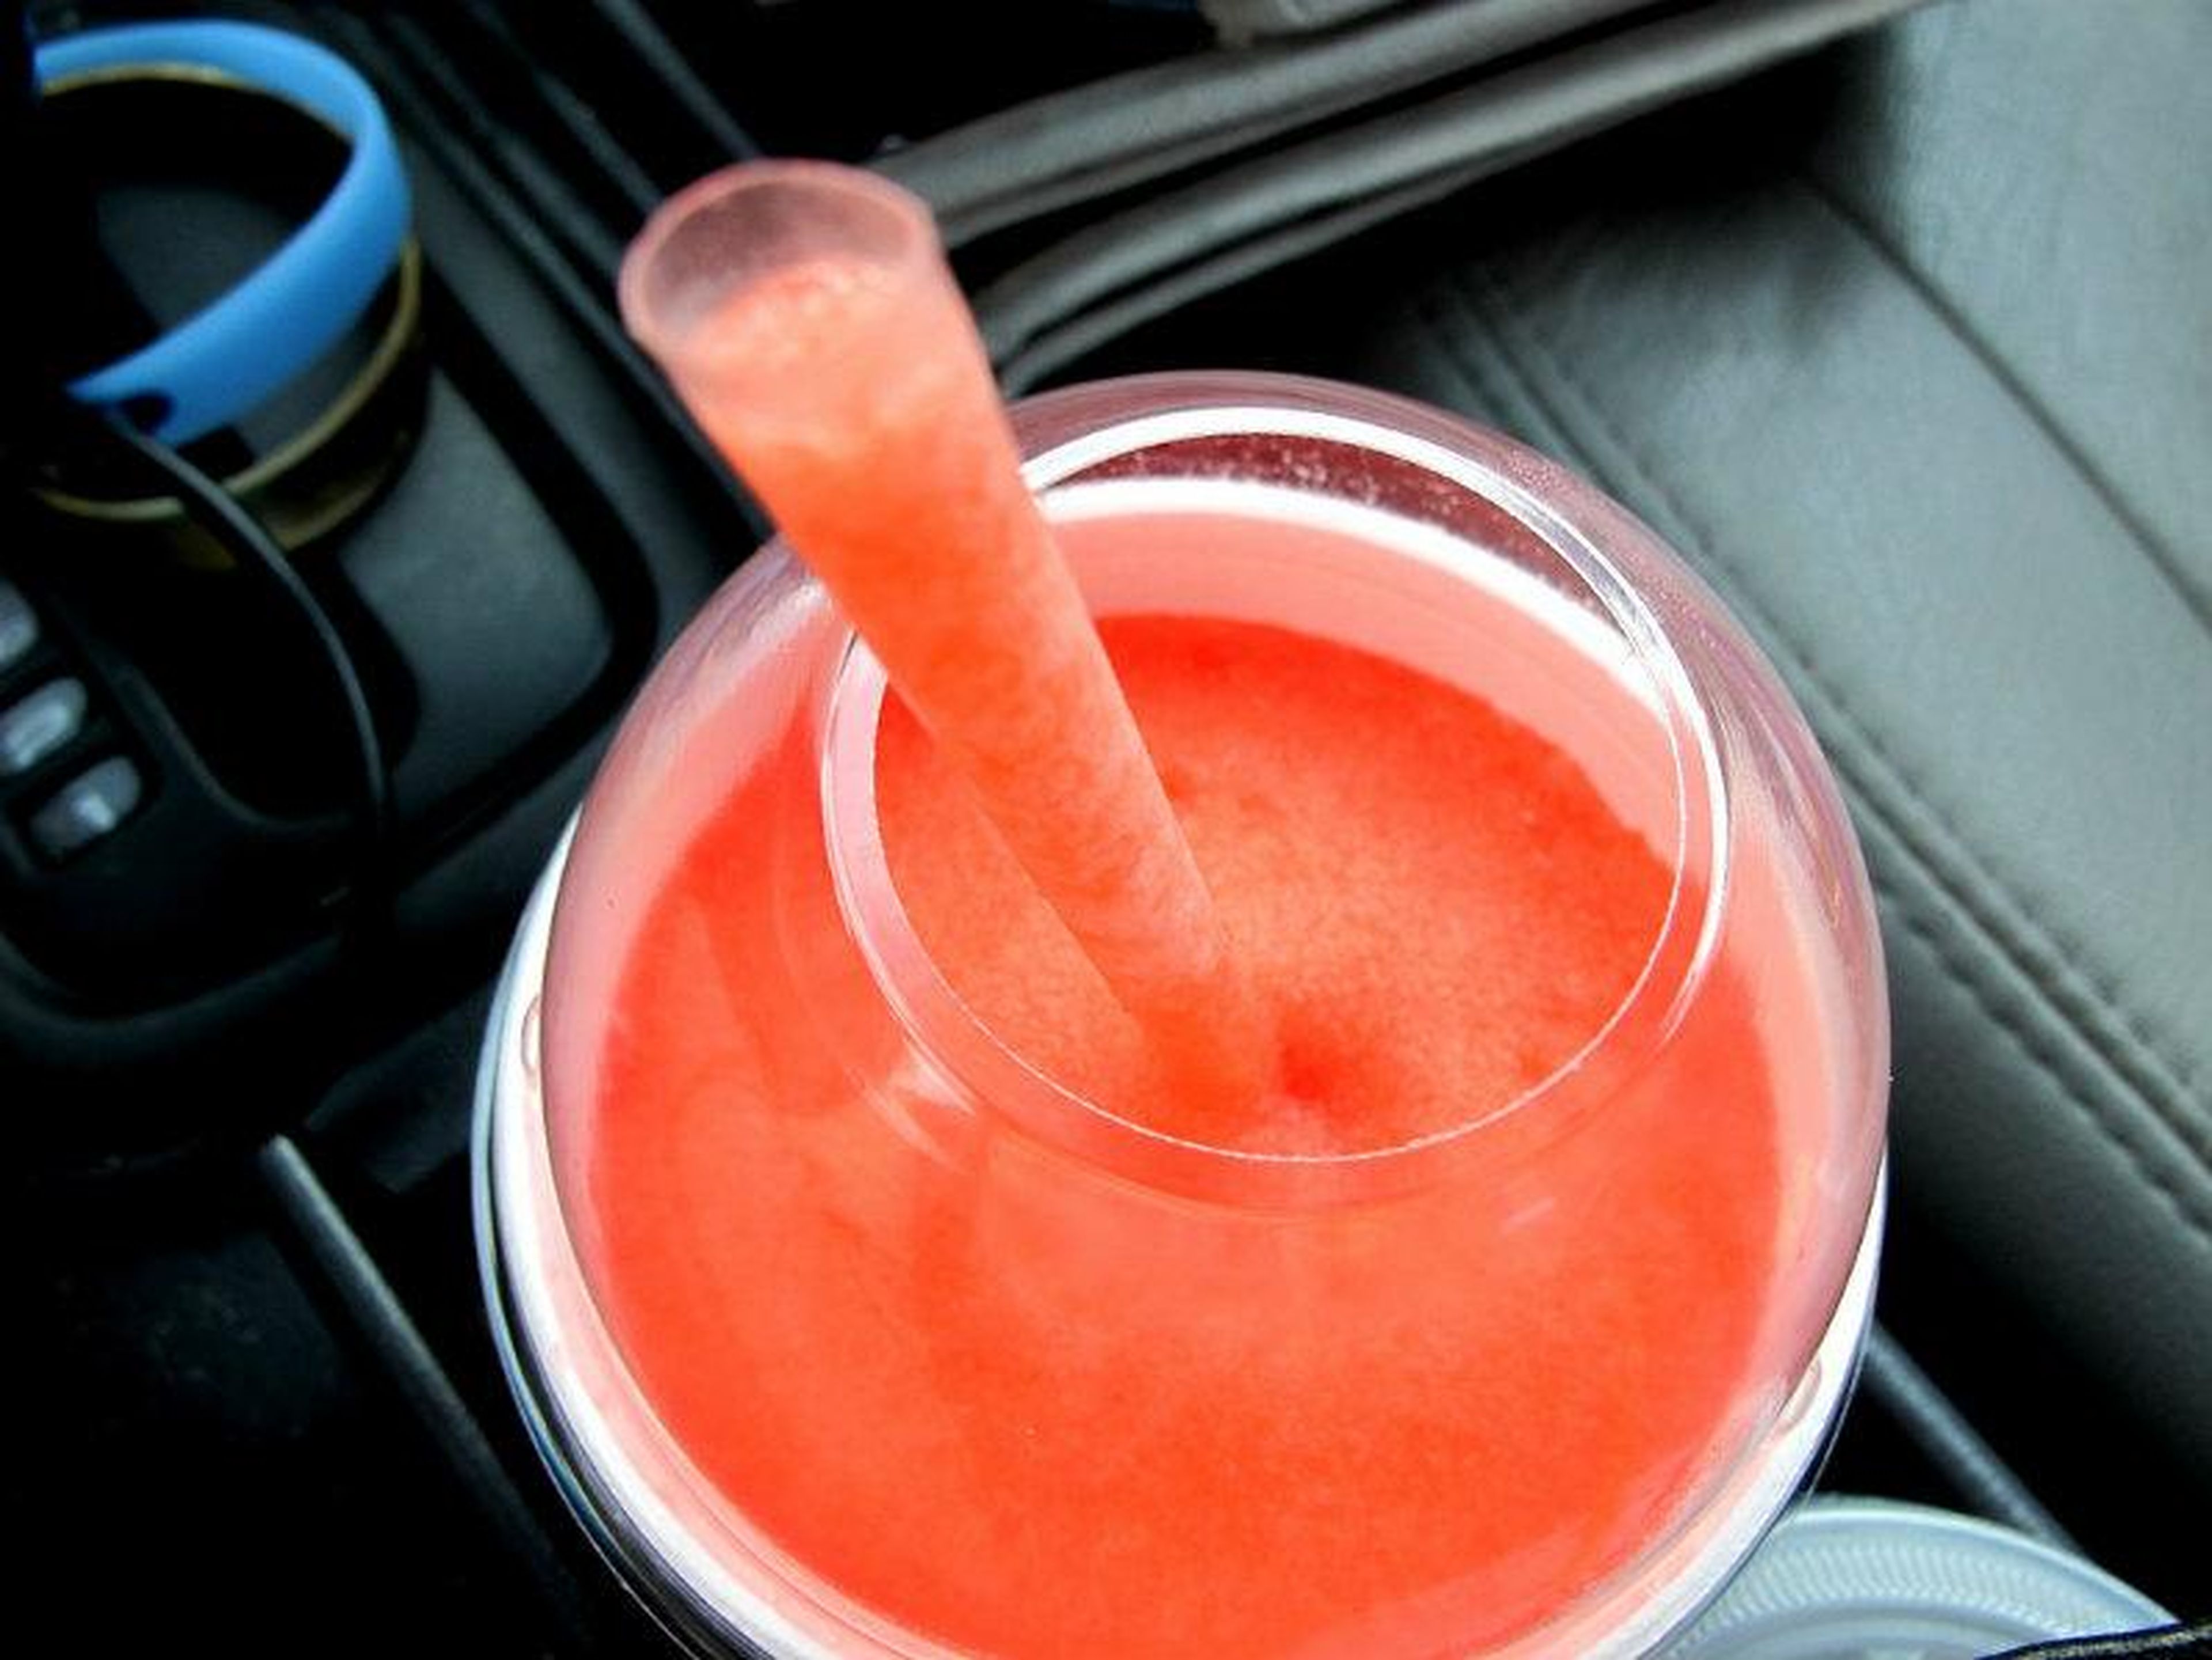 ICEEs are a refreshing summer treat.